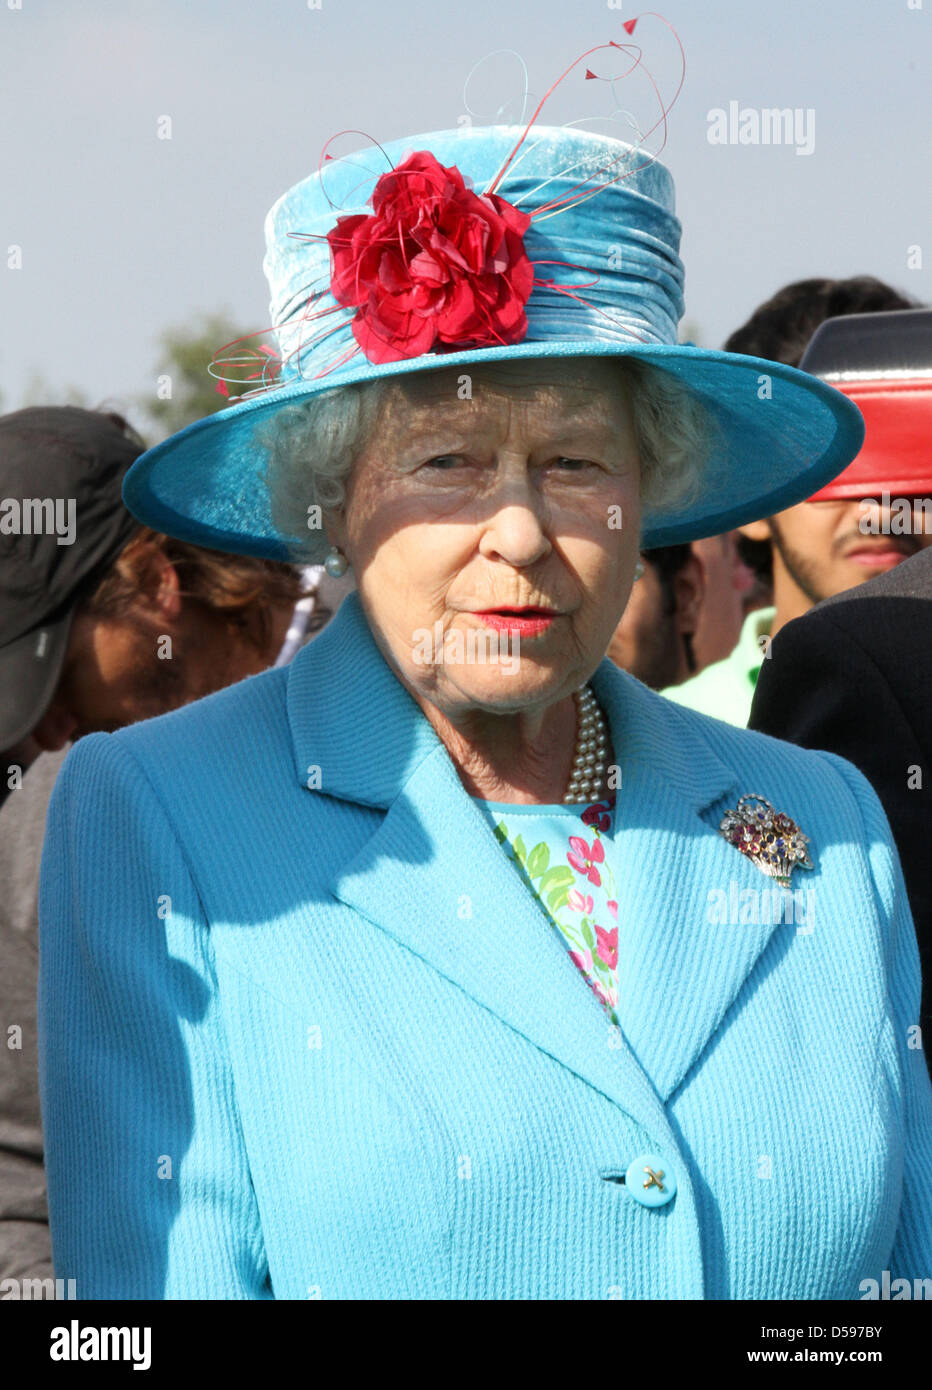 Queen Elizabeth II attends the Harcourt Developments Queen's Cup at the Guards Polo Club in Windsor Great Park, United Kingdom, 13 June 2010. The club was founded on 25 January 1955 by the Duke of Edinburgh. Photo: Albert Nieboer (NETHERLANDS OUT) Stock Photo